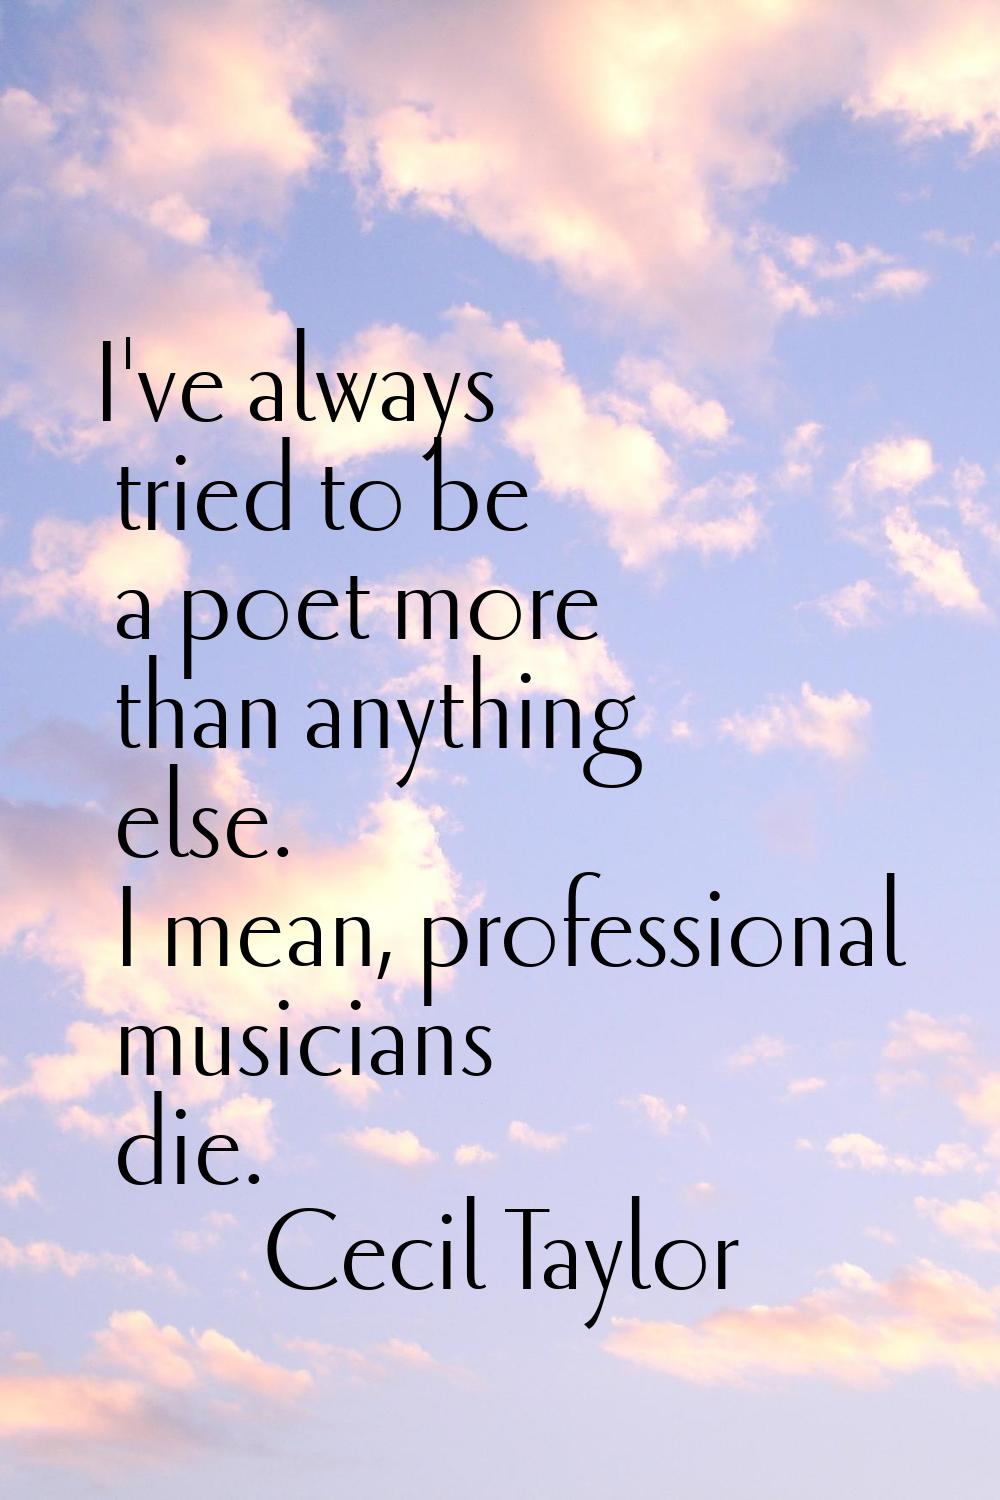 I've always tried to be a poet more than anything else. I mean, professional musicians die.